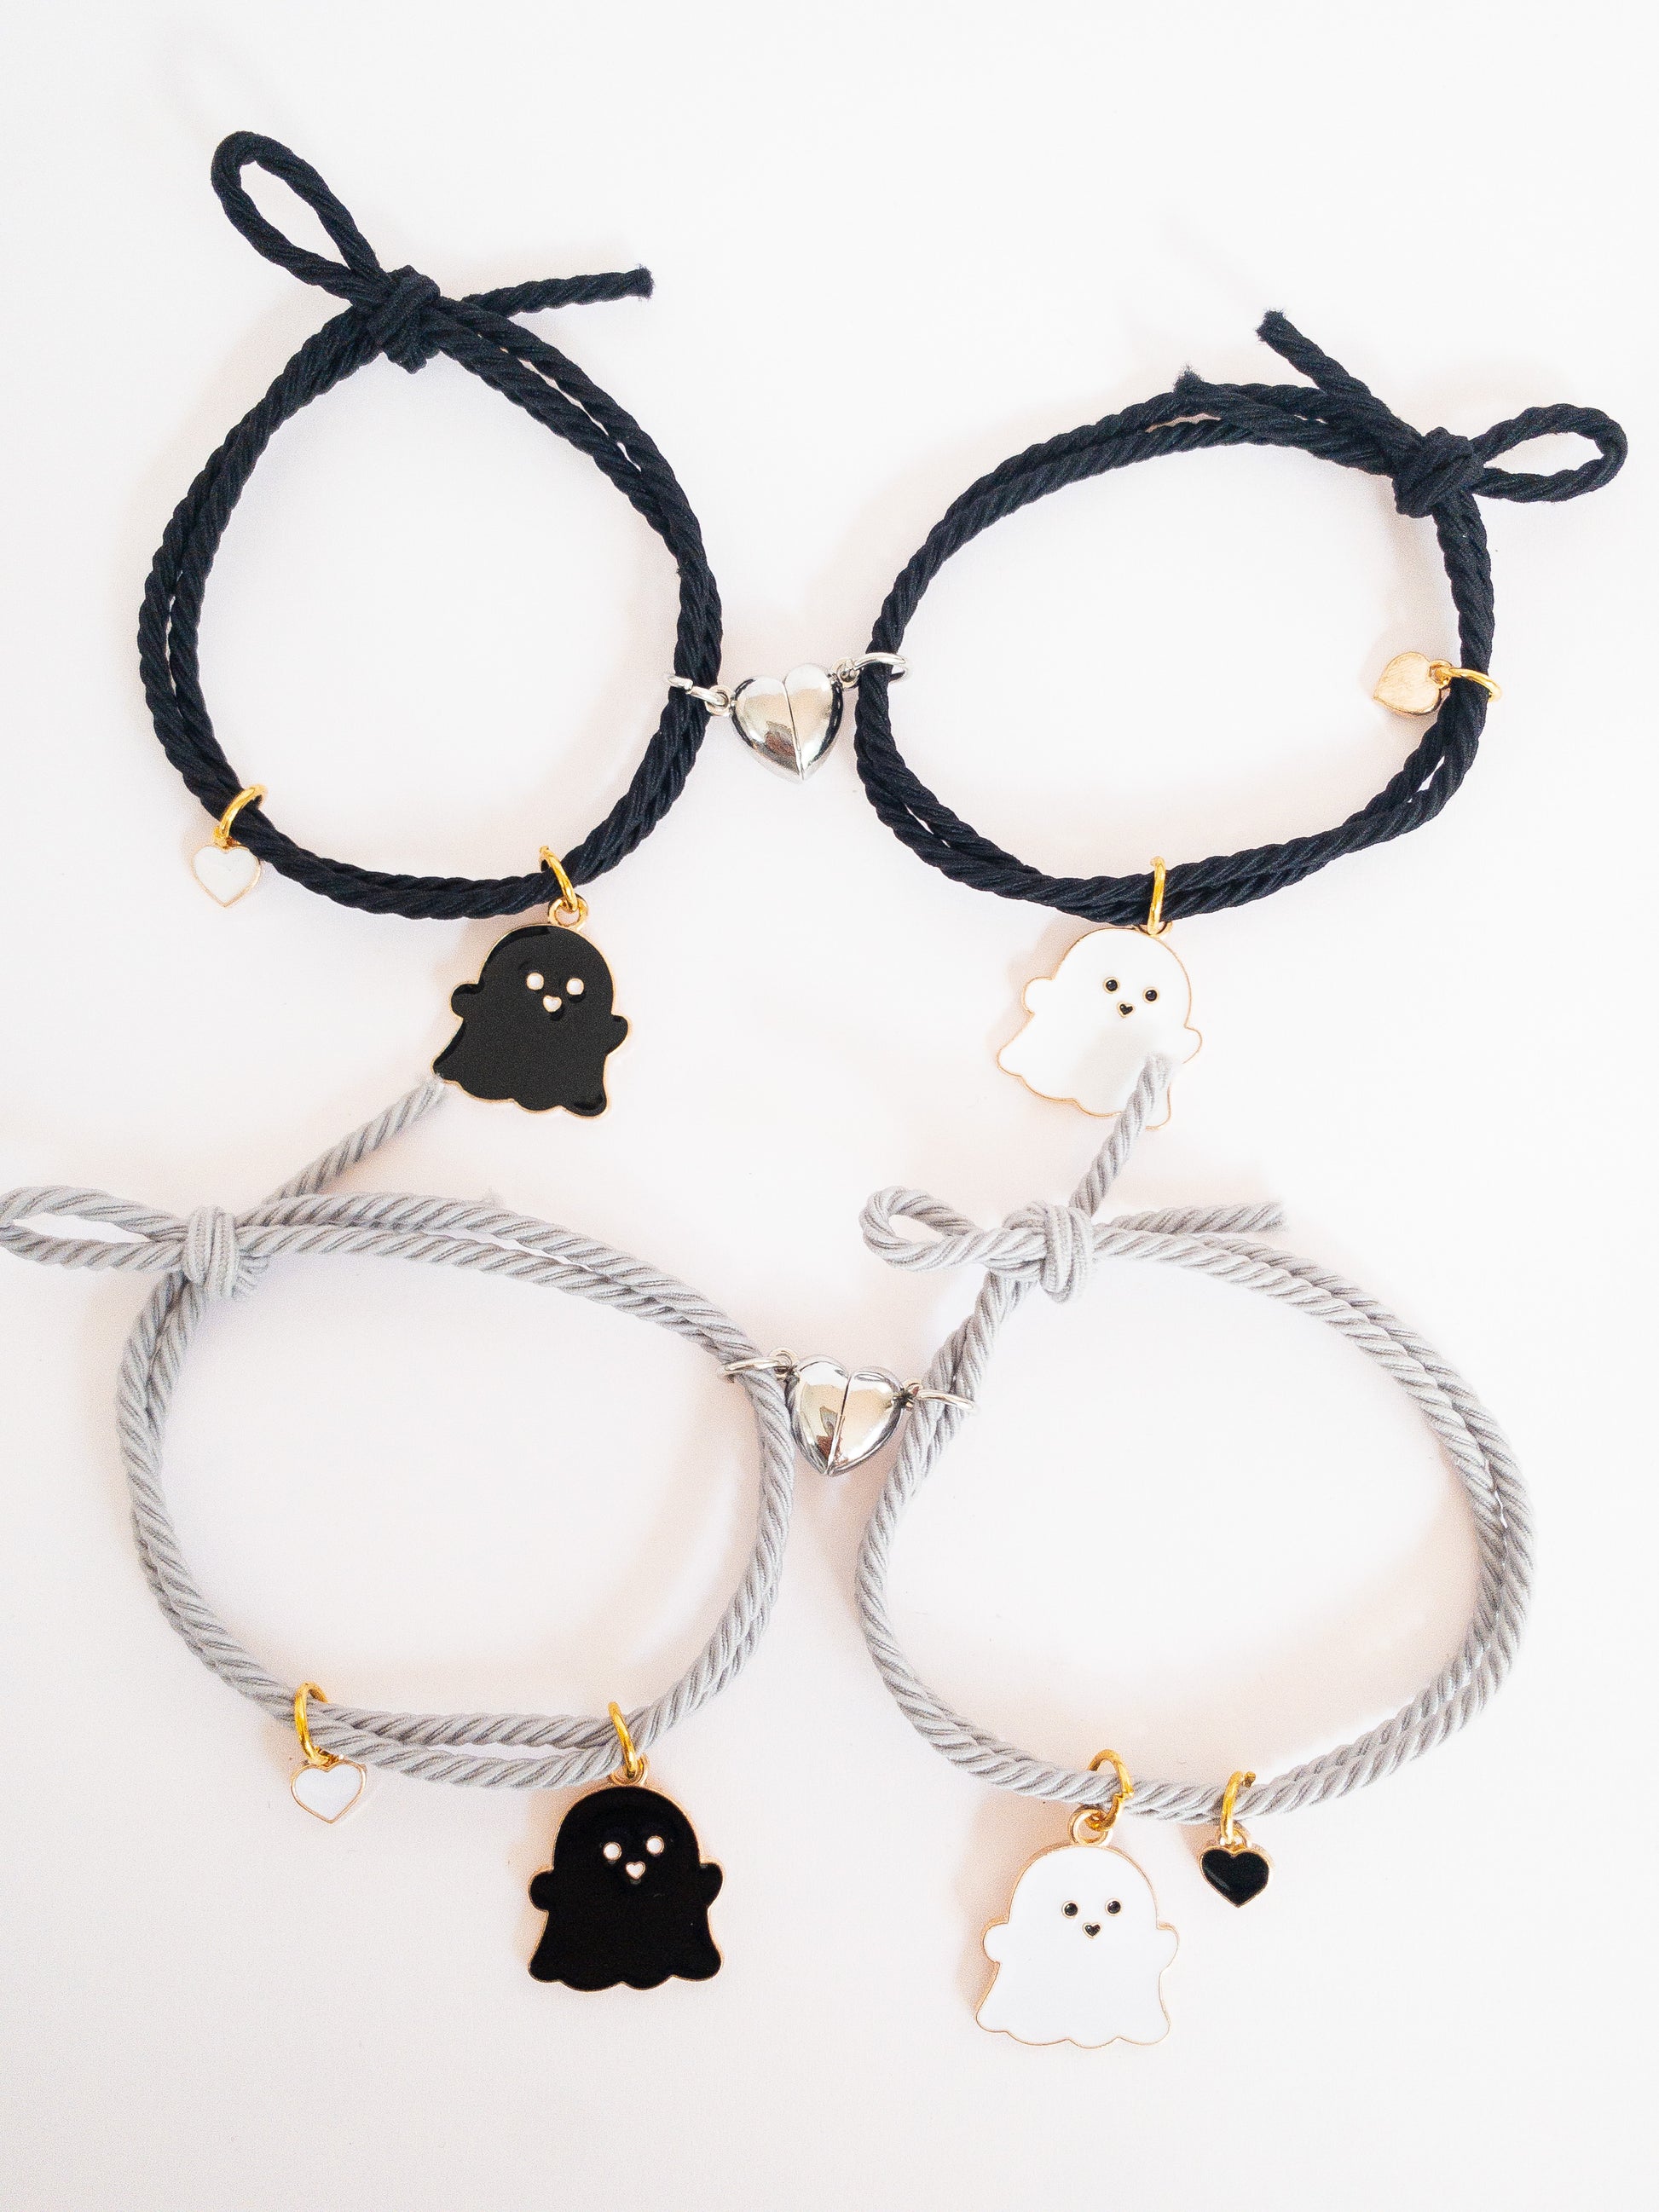 These ghostie besties are hard to keep apart! Two sets of lovable ghost hair ties that pull together when each half heart magnet matches up. They can be used as hair ties or kept on your wrist as bracelets--either way, a sweet way to remember your bestie.